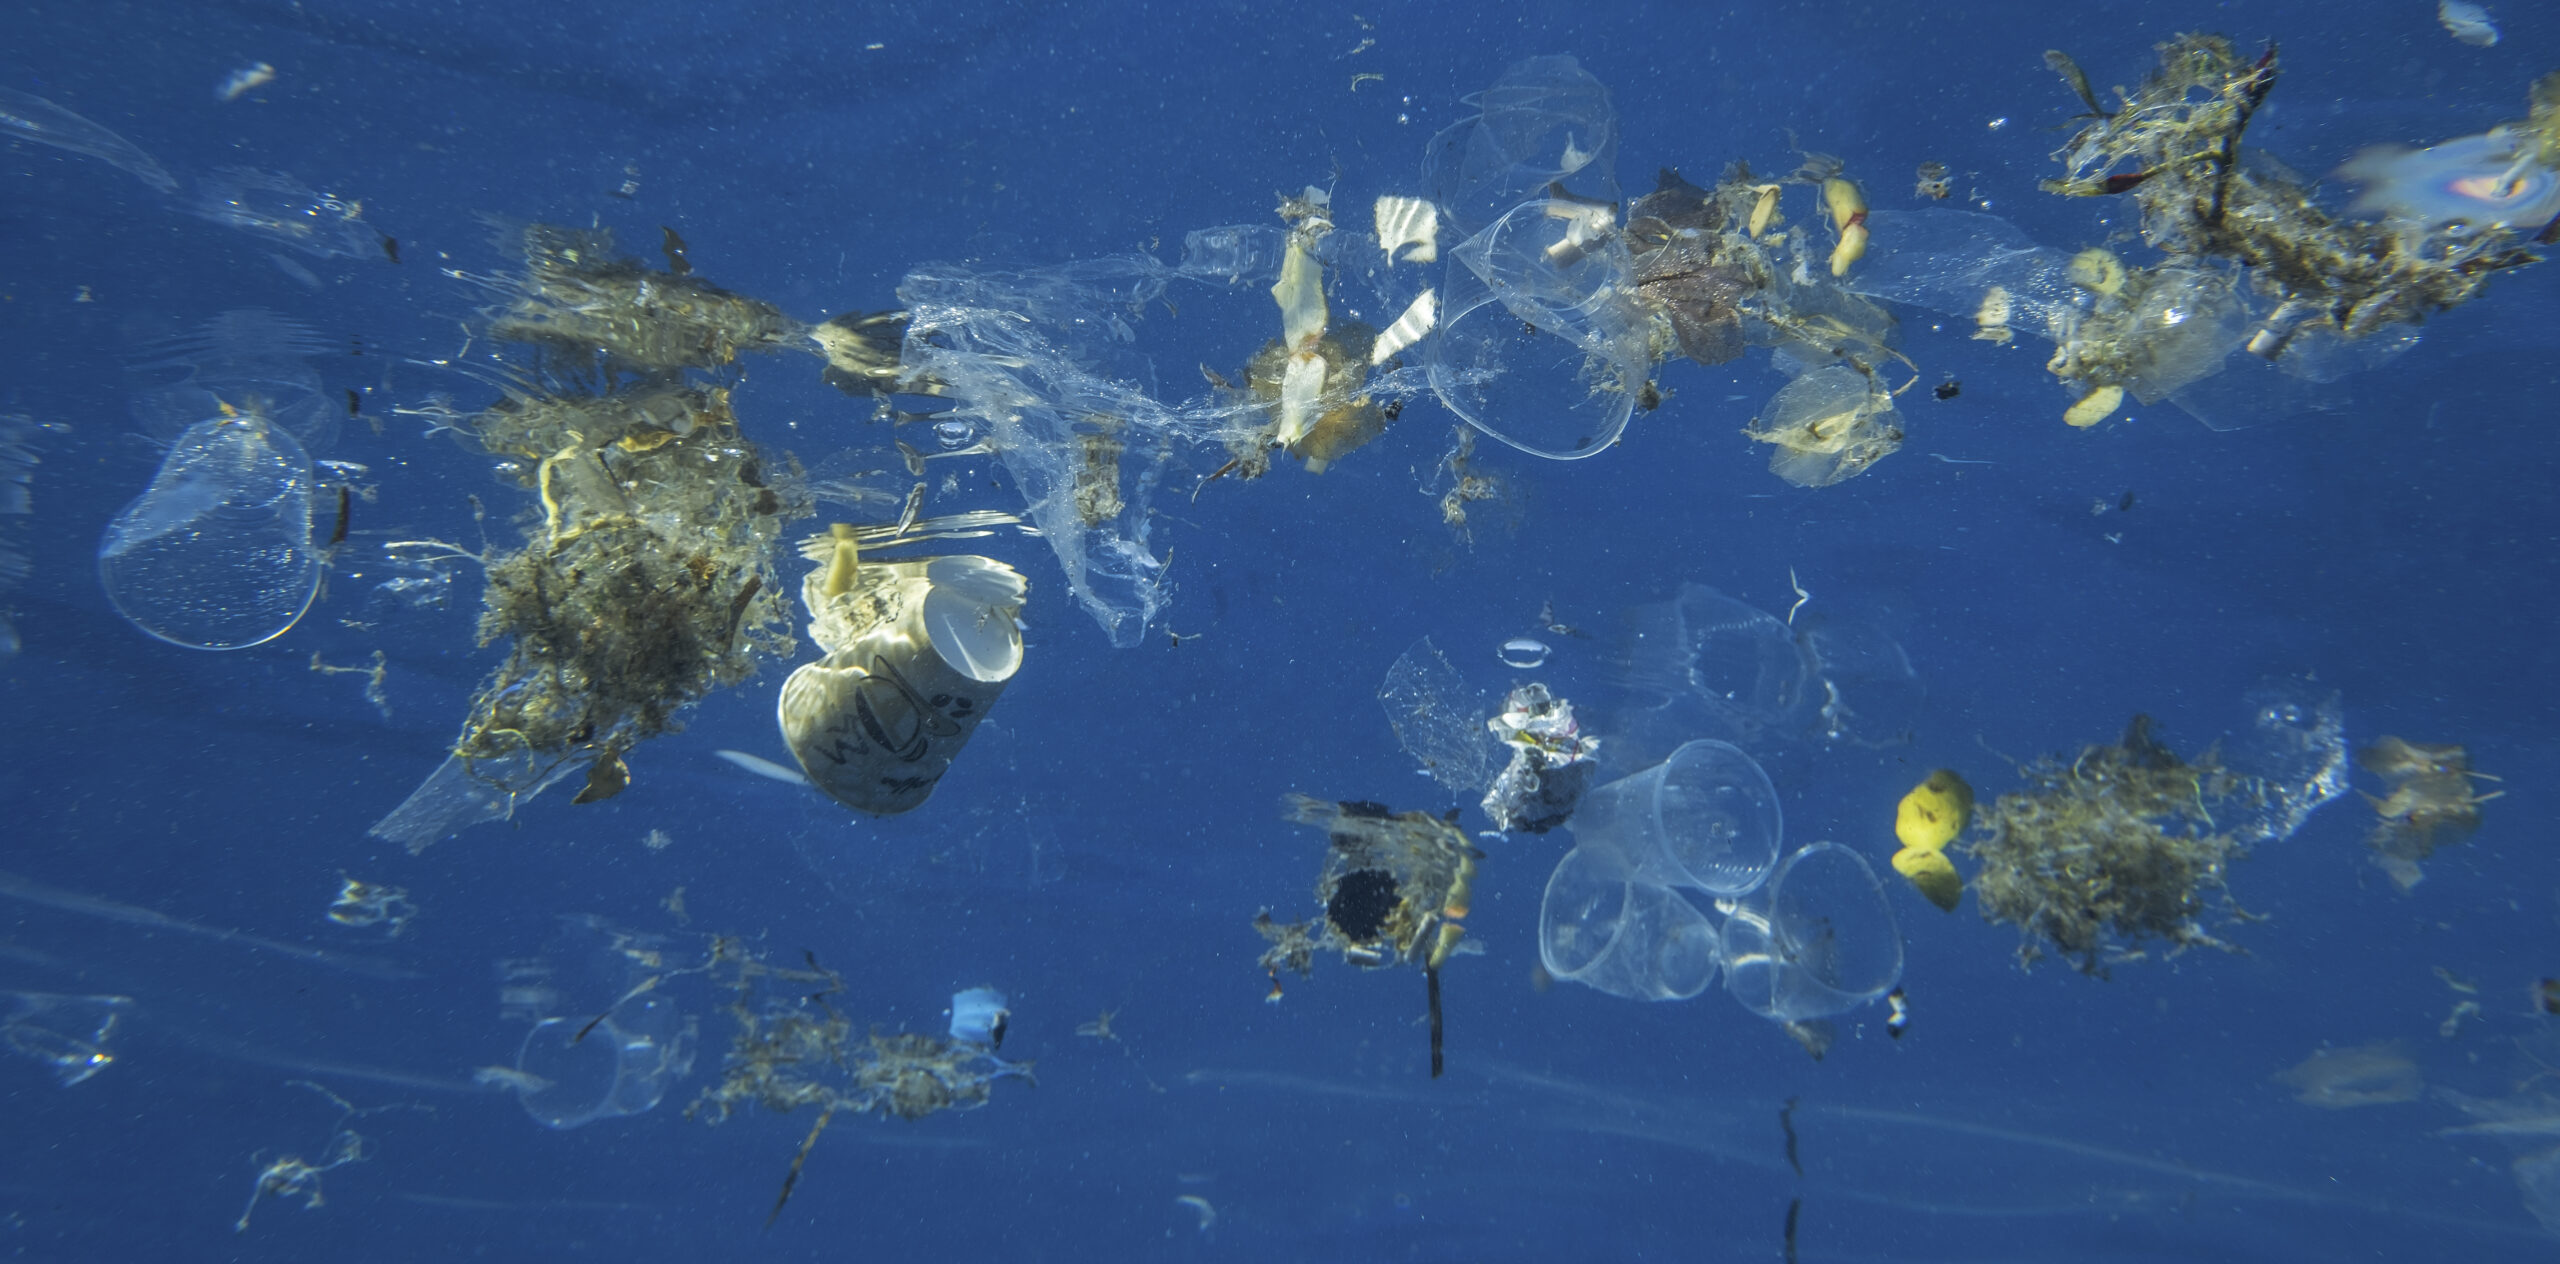 Plastic and other debris floats underwater in the Red Sea off Sharm El Sheikh, Egypt. Credit: Andrey Nekrasov / Barcroft Media via Getty Images.